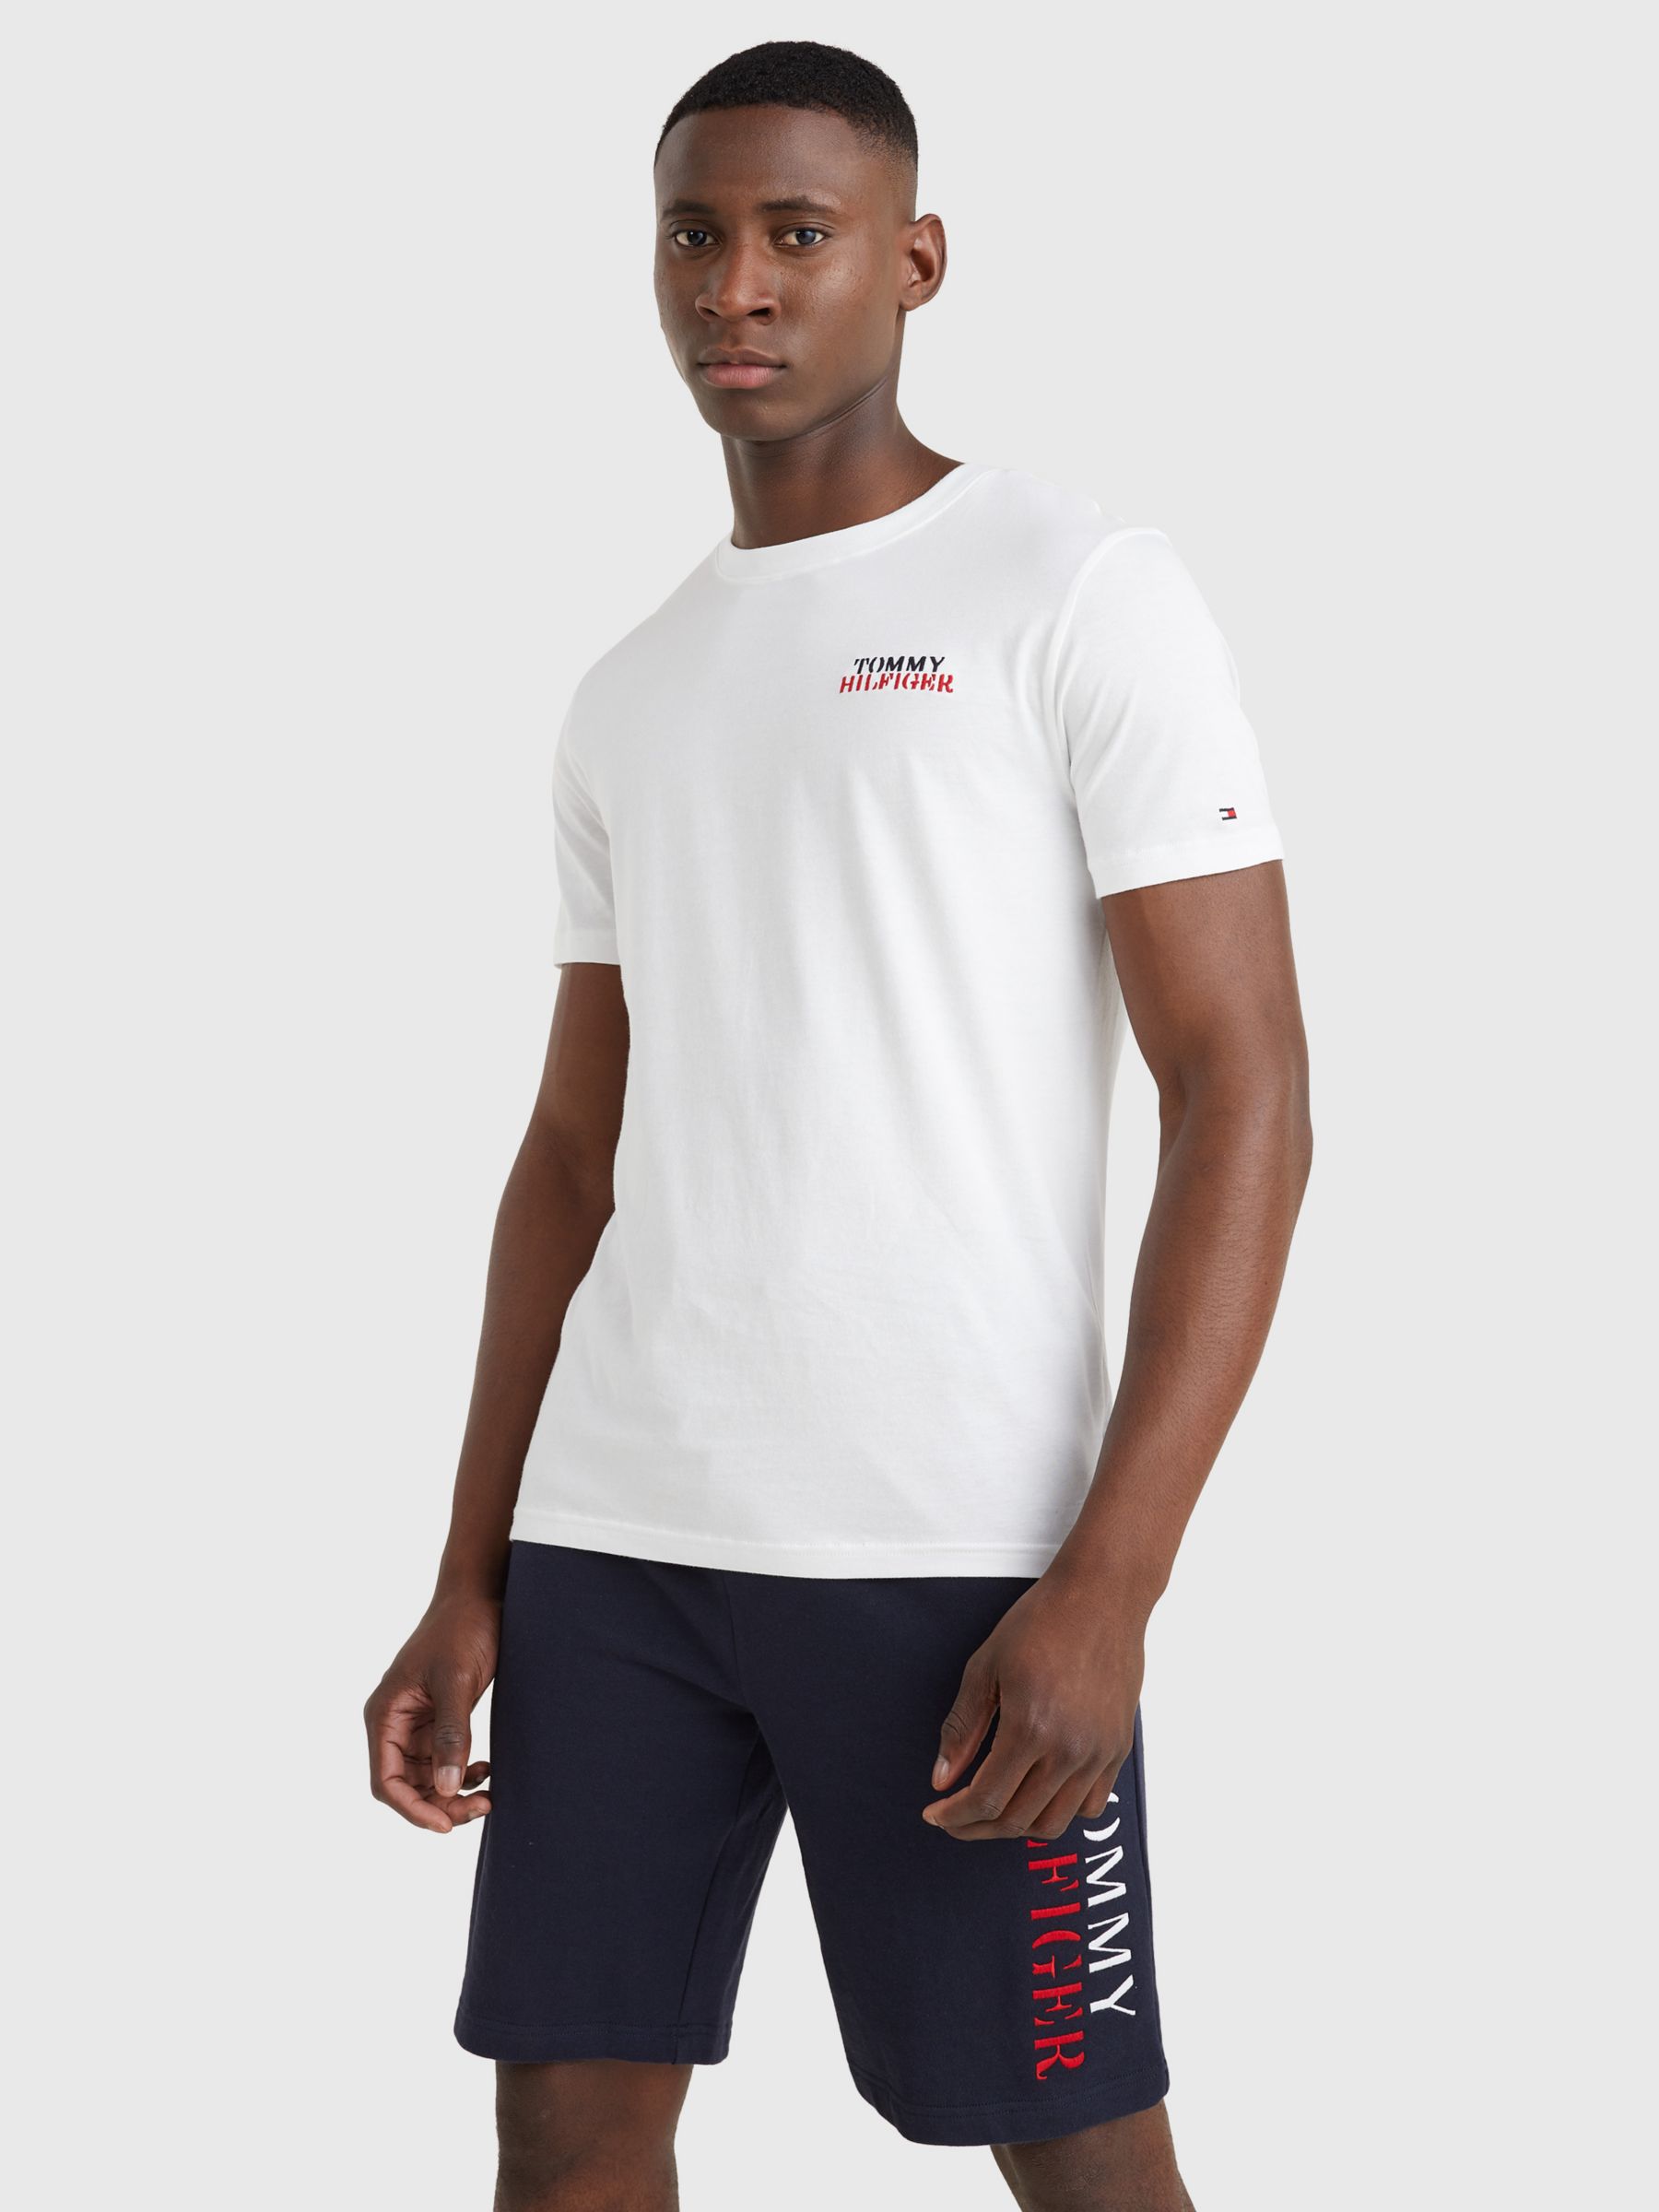 Tommy Hilfiger Crew Neck Short Sleeve Lounge Top, White, S